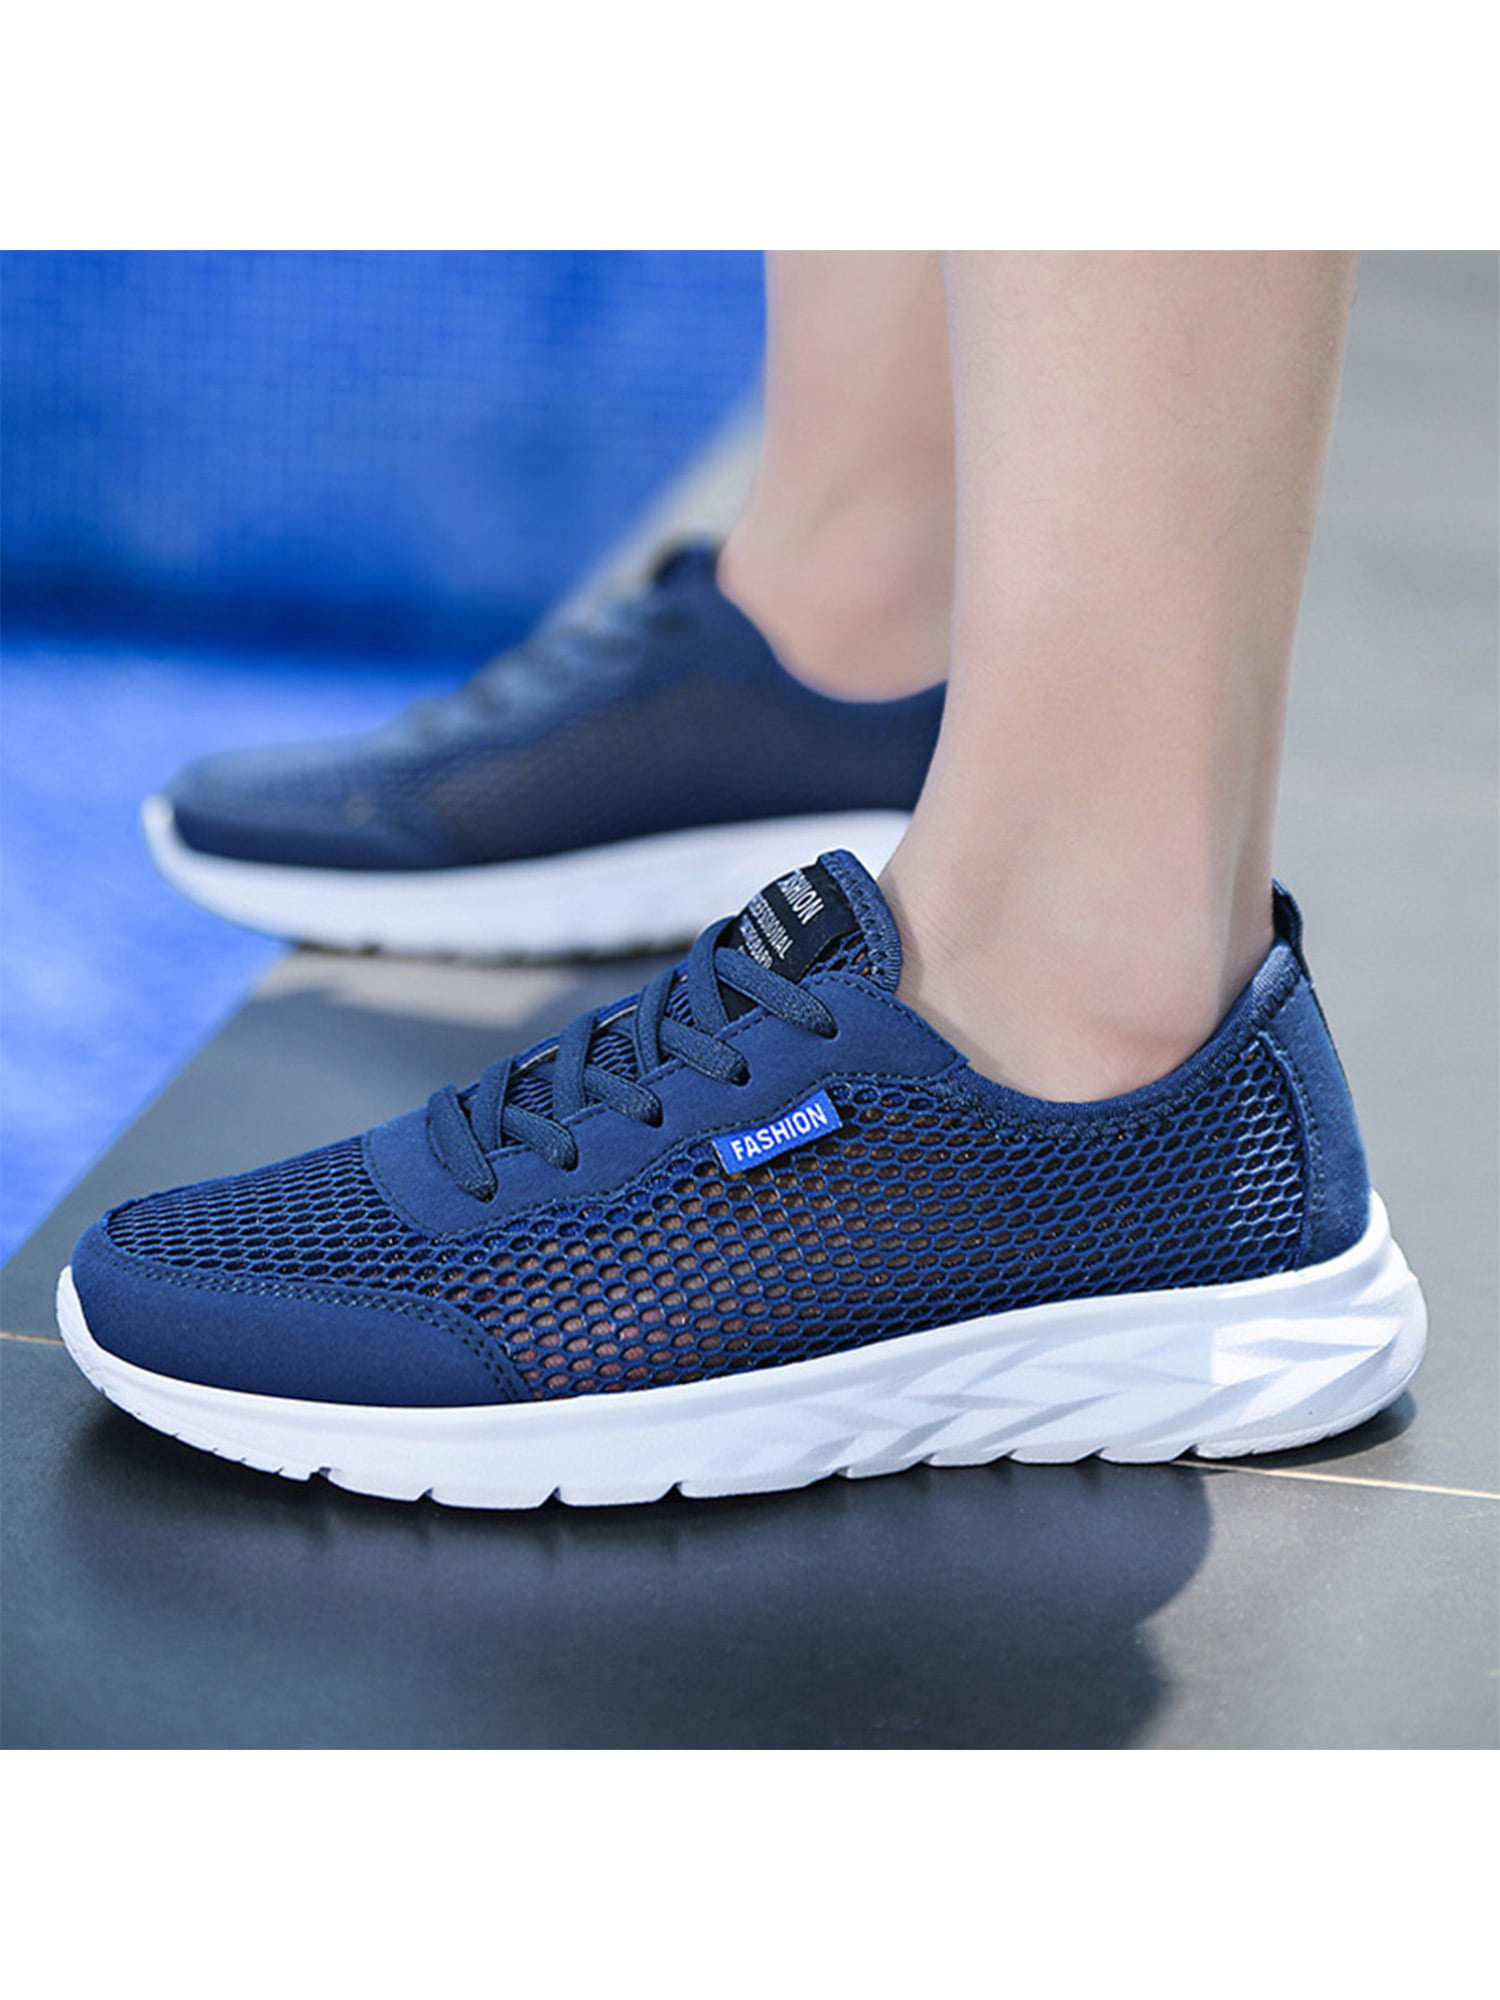 Fashion Men's Athletic Sneakers Breathable Sports Running Casual Fitness Shoes 